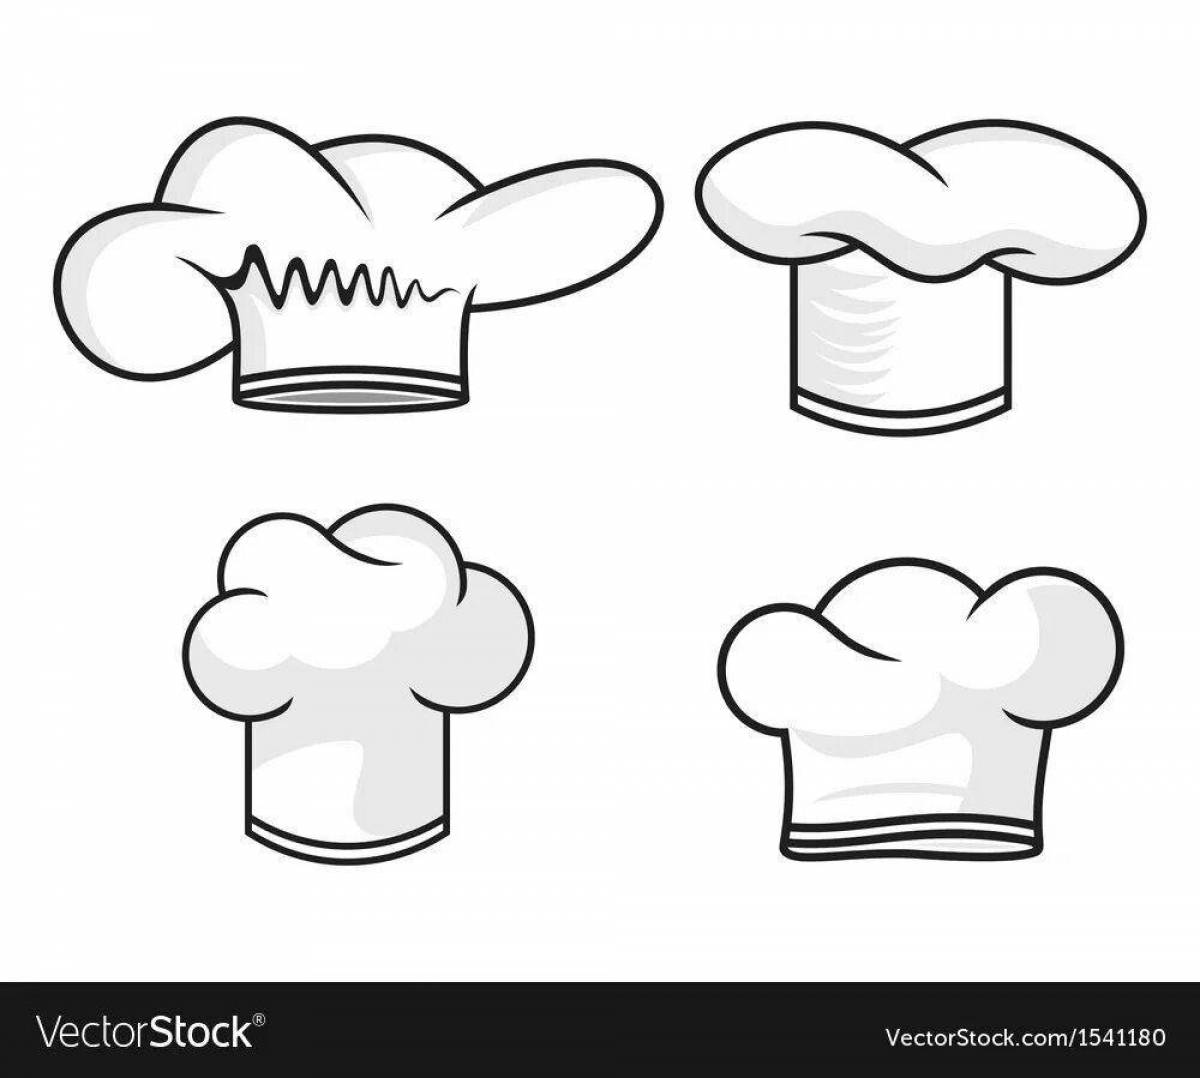 Fabulous chef hat coloring page